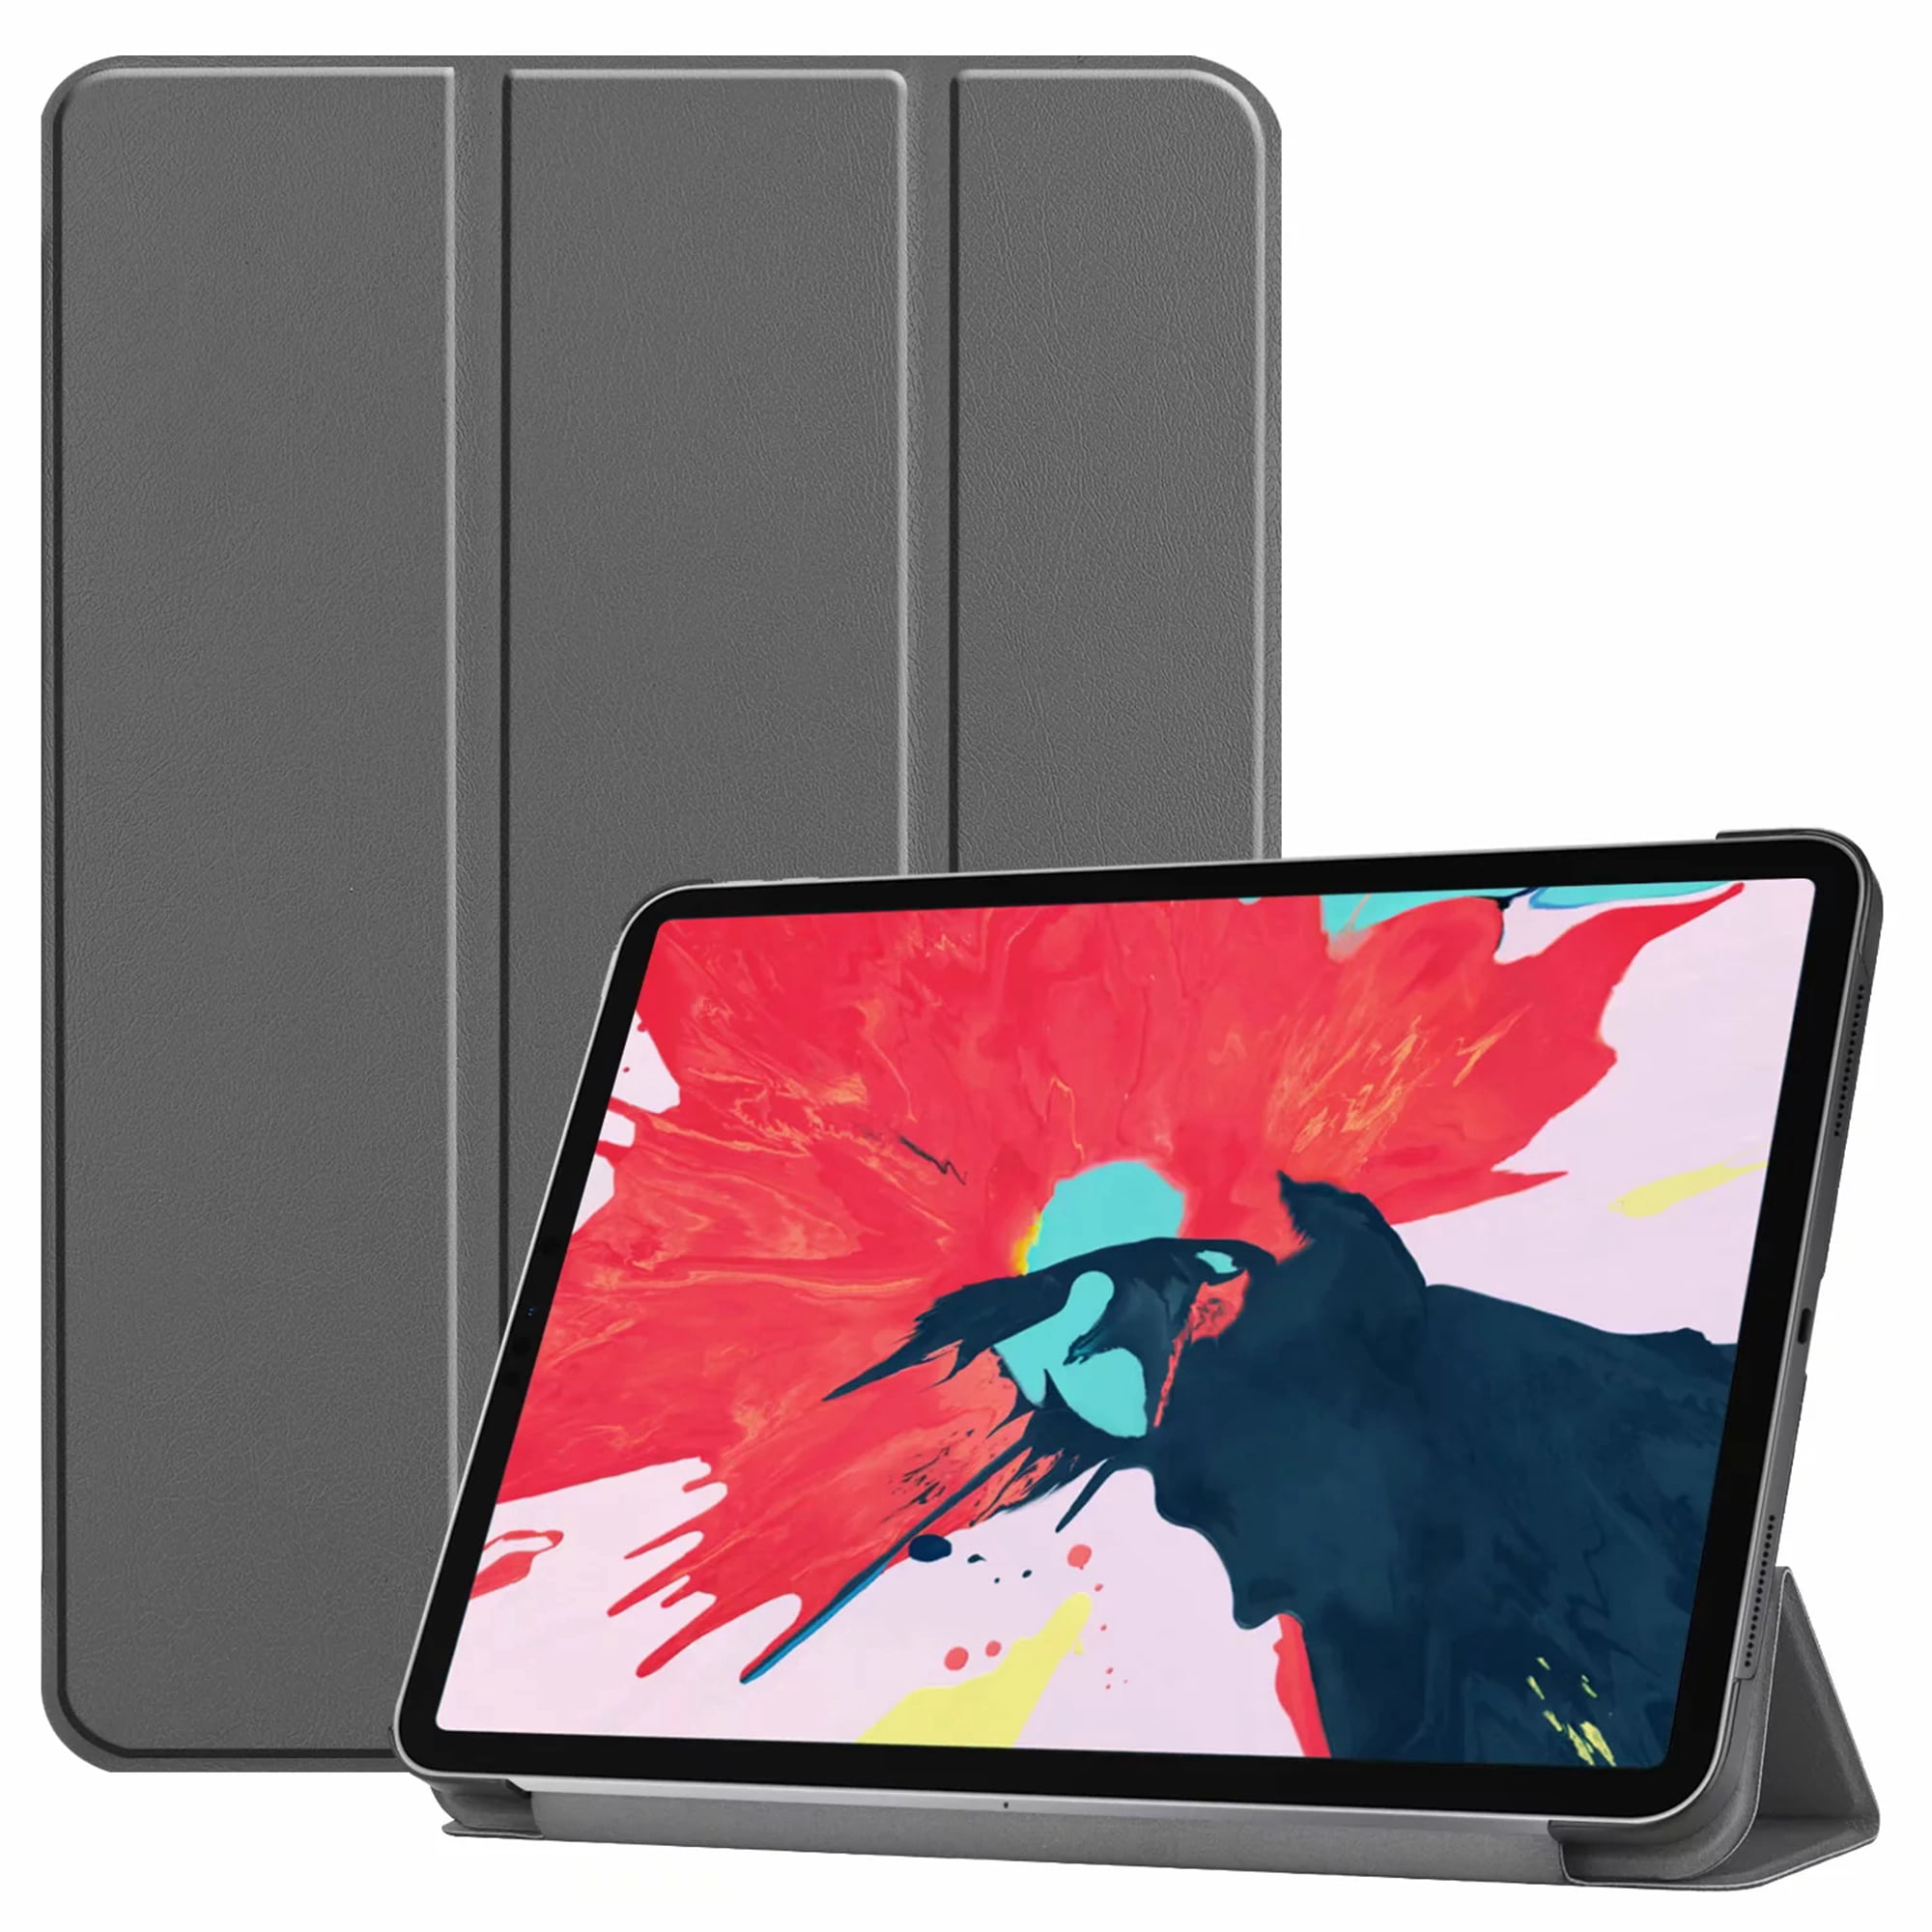 Dteck Slim Fit Case For New iPad Pro 11 inch 2020, TriFold Standing